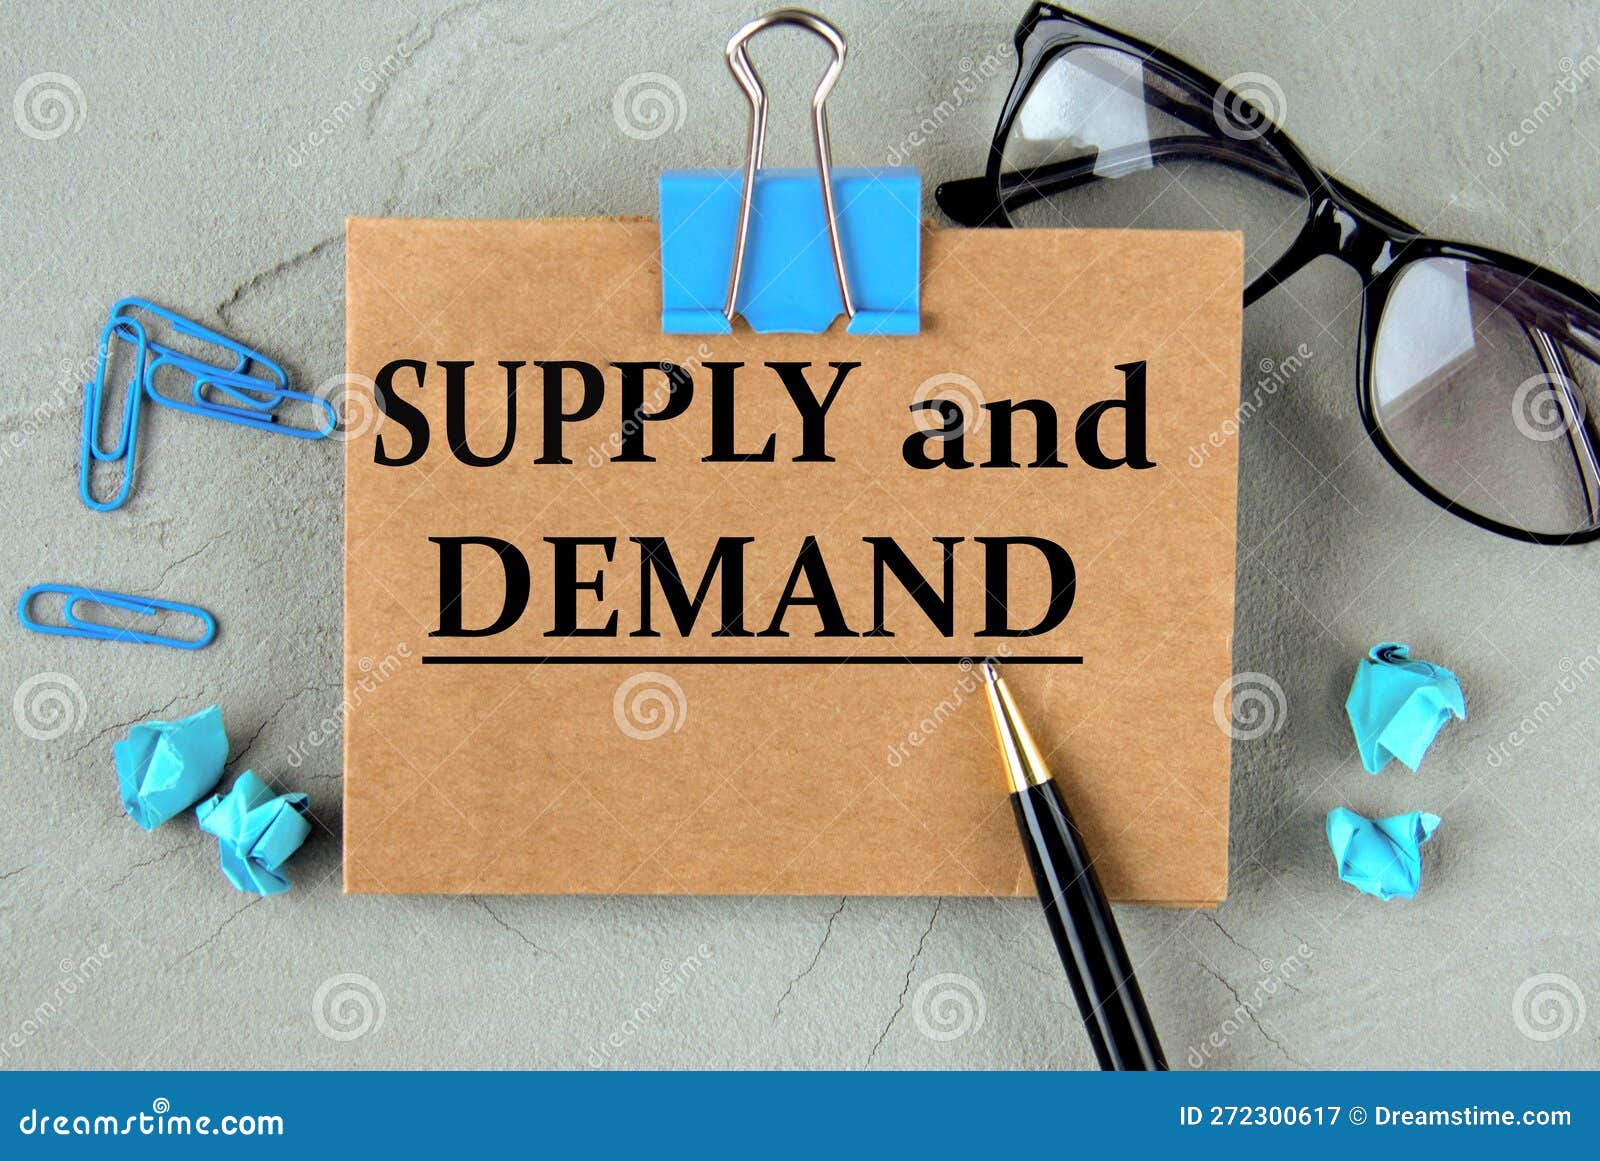 SUPPLY and DEMAND - Words on Brown Paper on the Background of Glasses, Pens and Paper Clips Stock Image